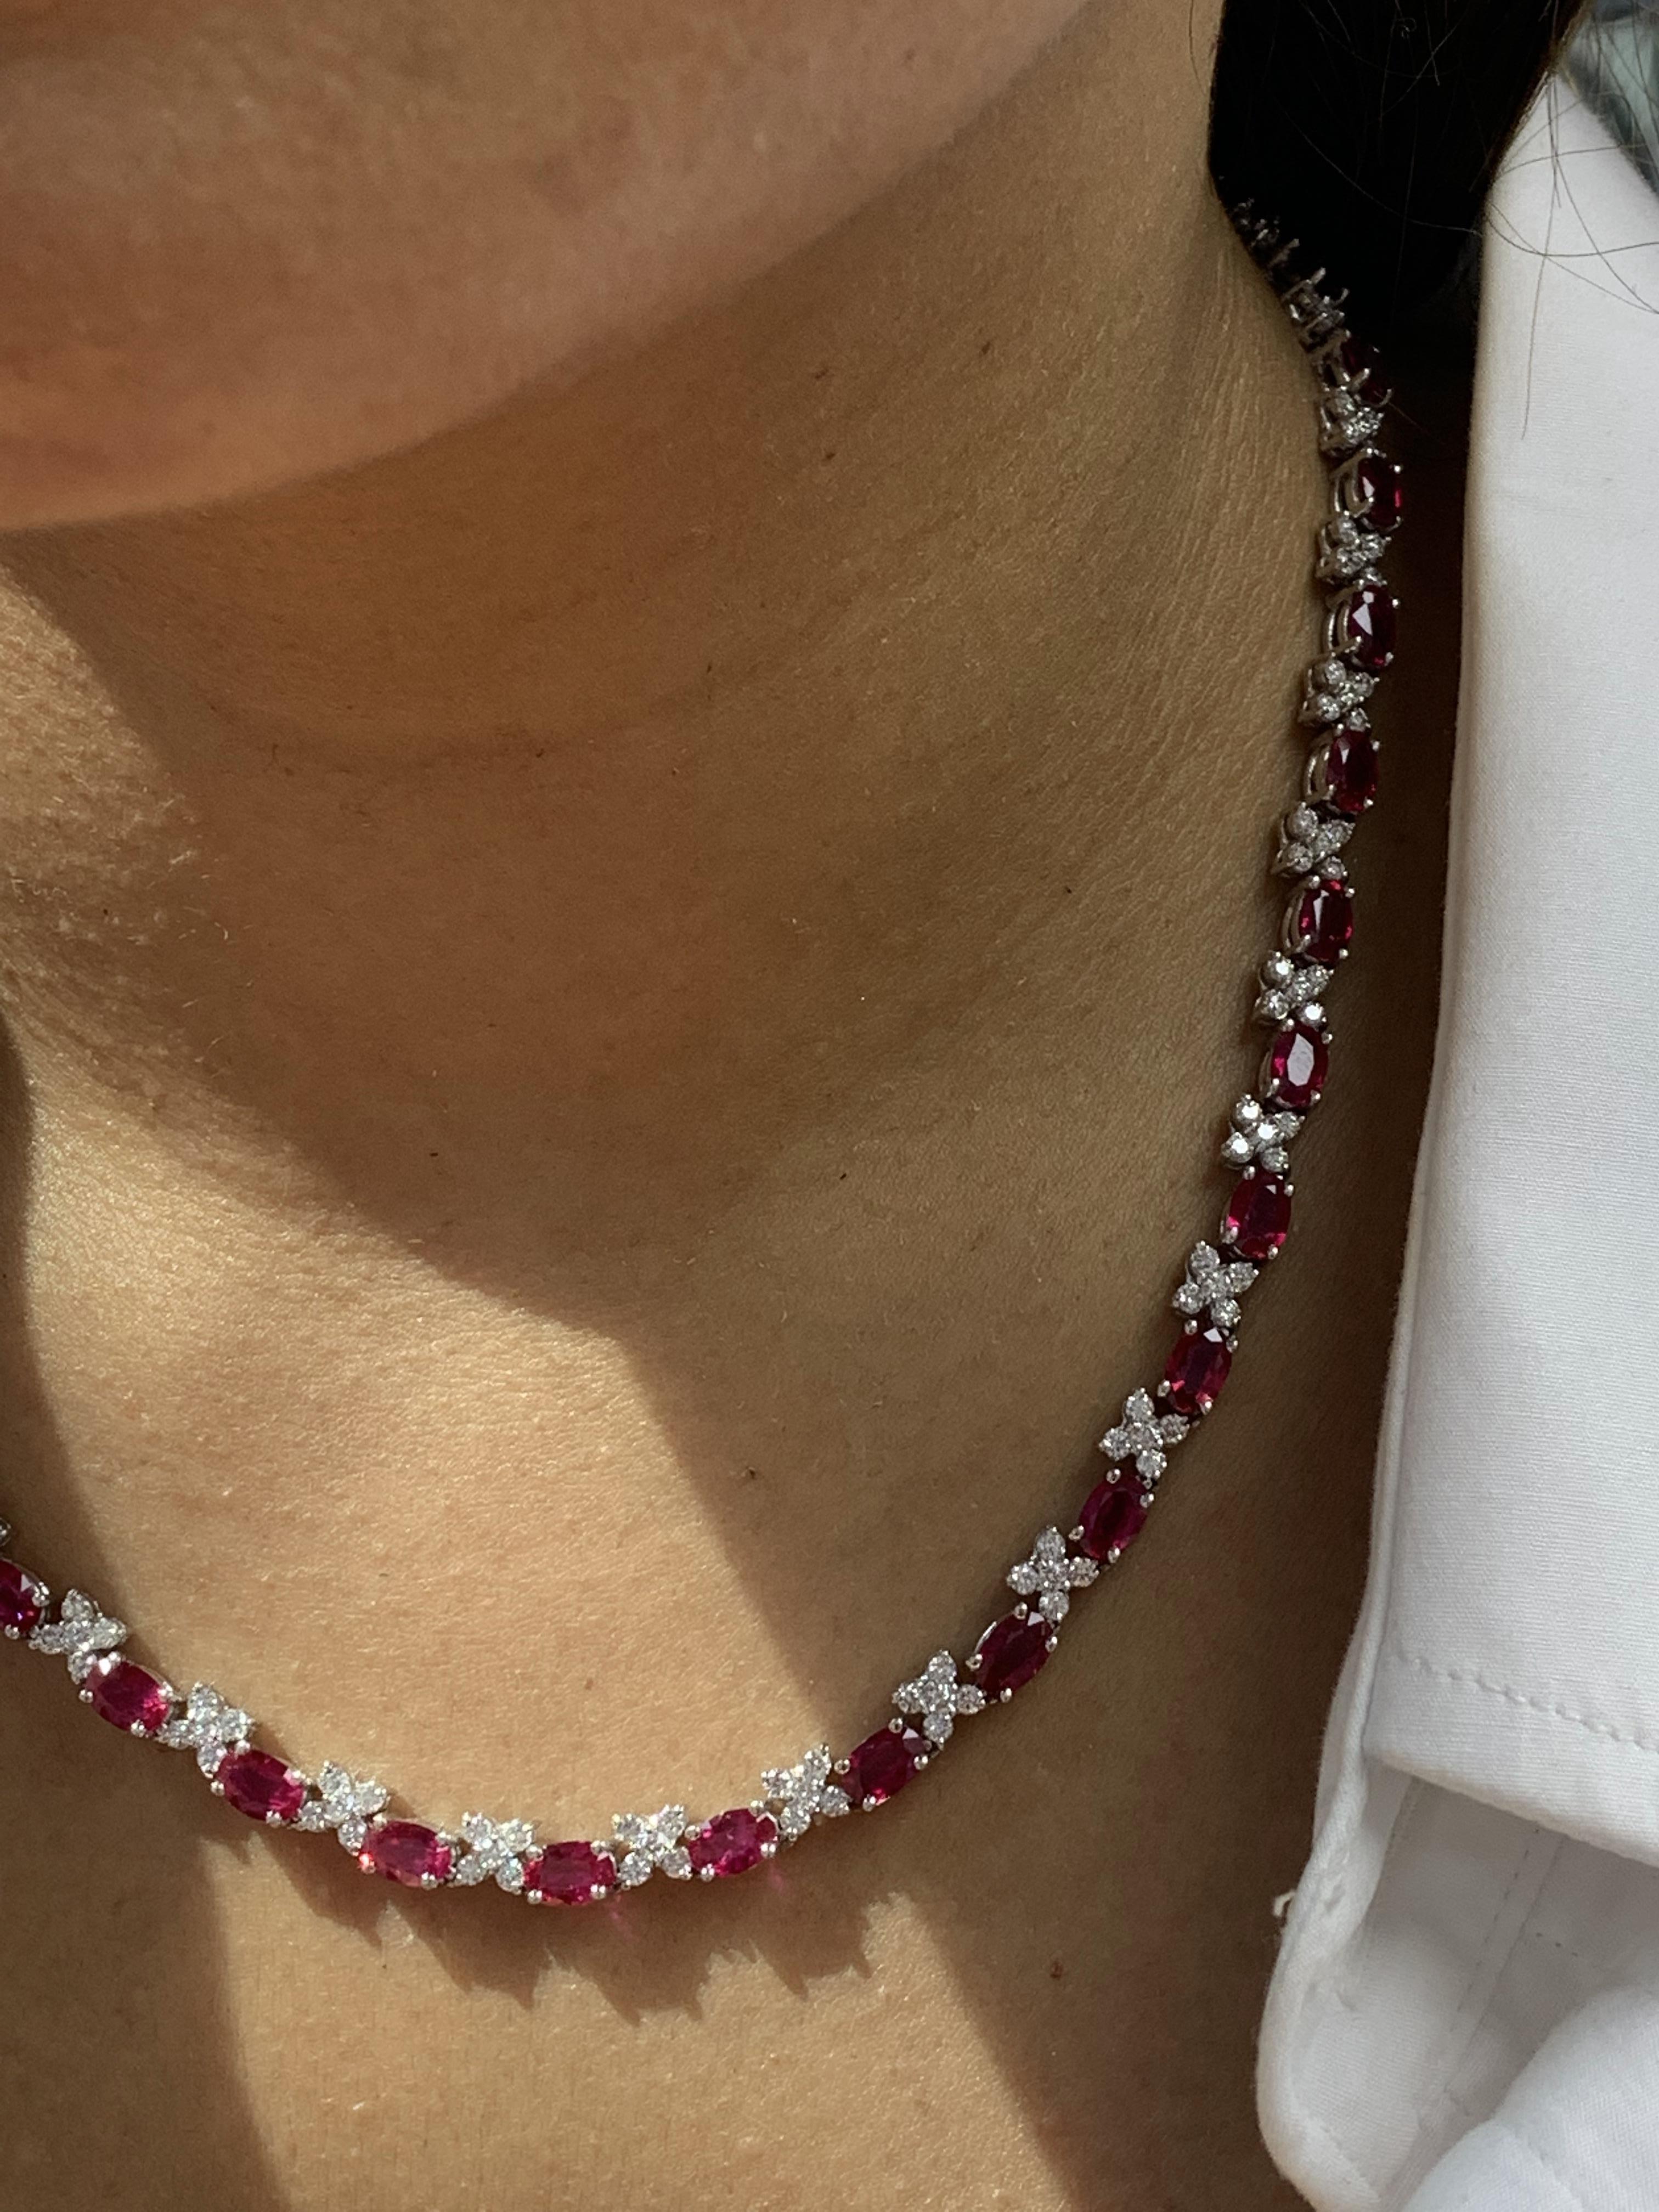 17.68 Carat Oval Cut Ruby and Diamond Tennis Necklace in 14K White Gold 4